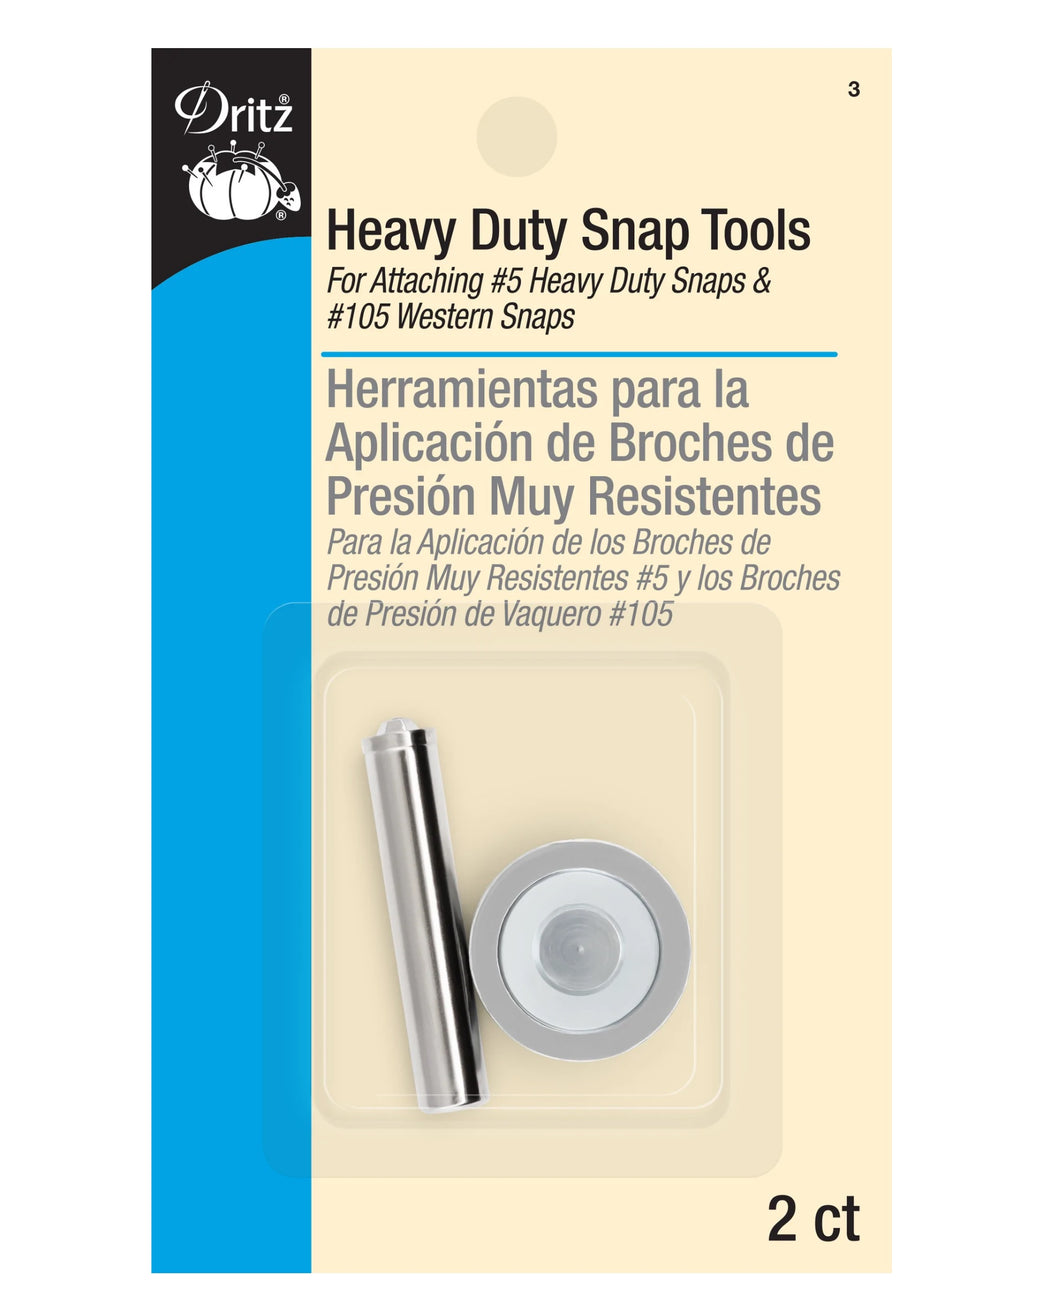 HEAVY DUTY SNAP TOOLS FOR SNAPS - Zipper and Thread